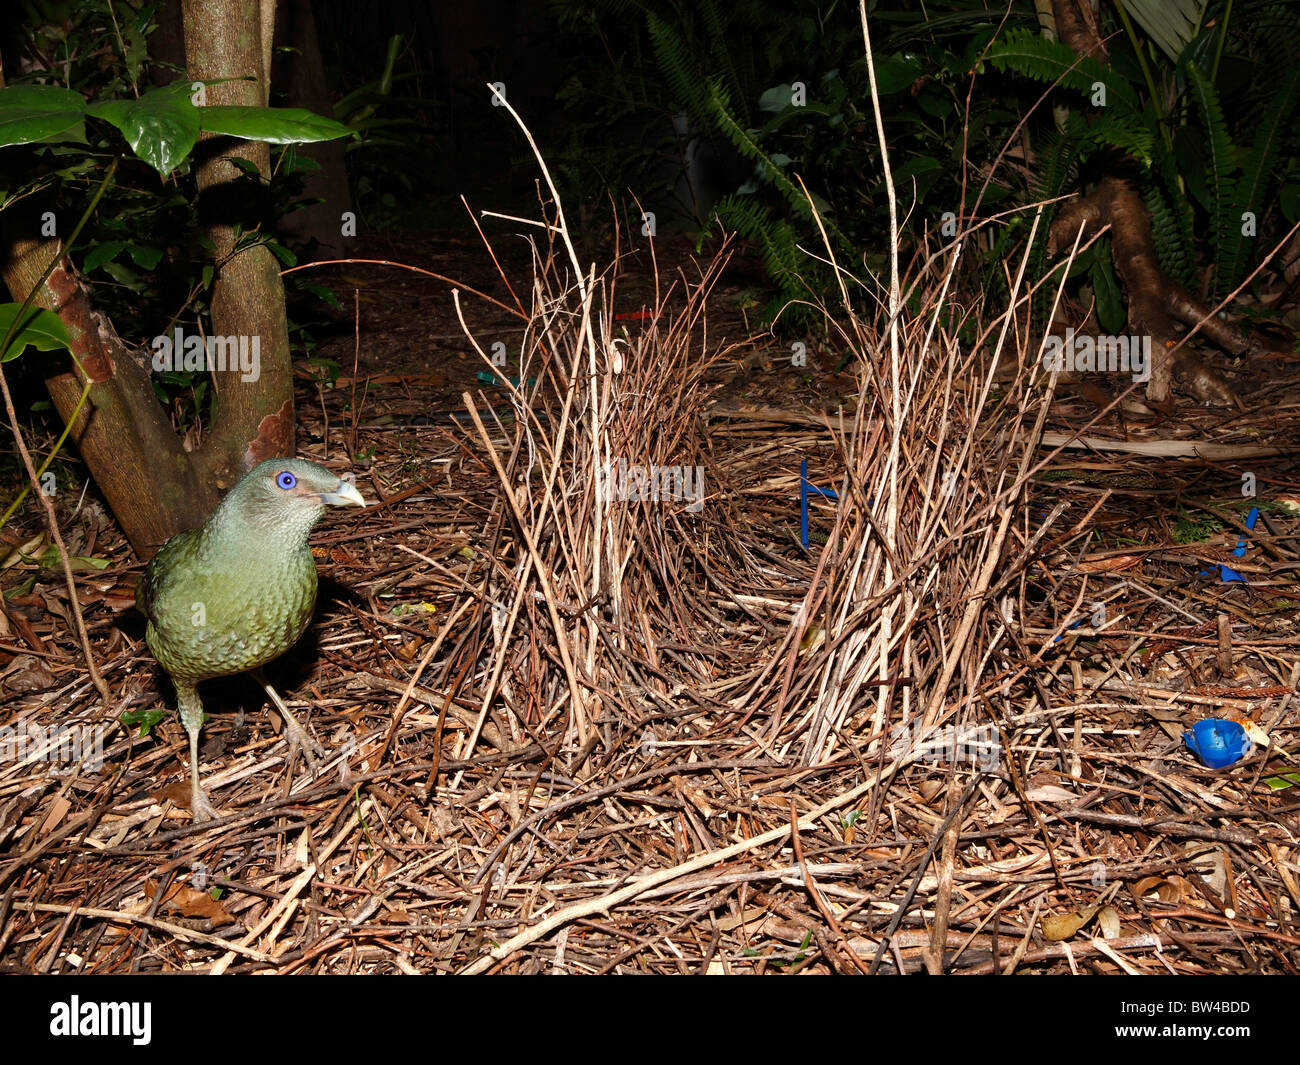 Satin bowerbird, Ptilonorhynchus violaceus, standing next to its bower. See below for more information Stock Photo